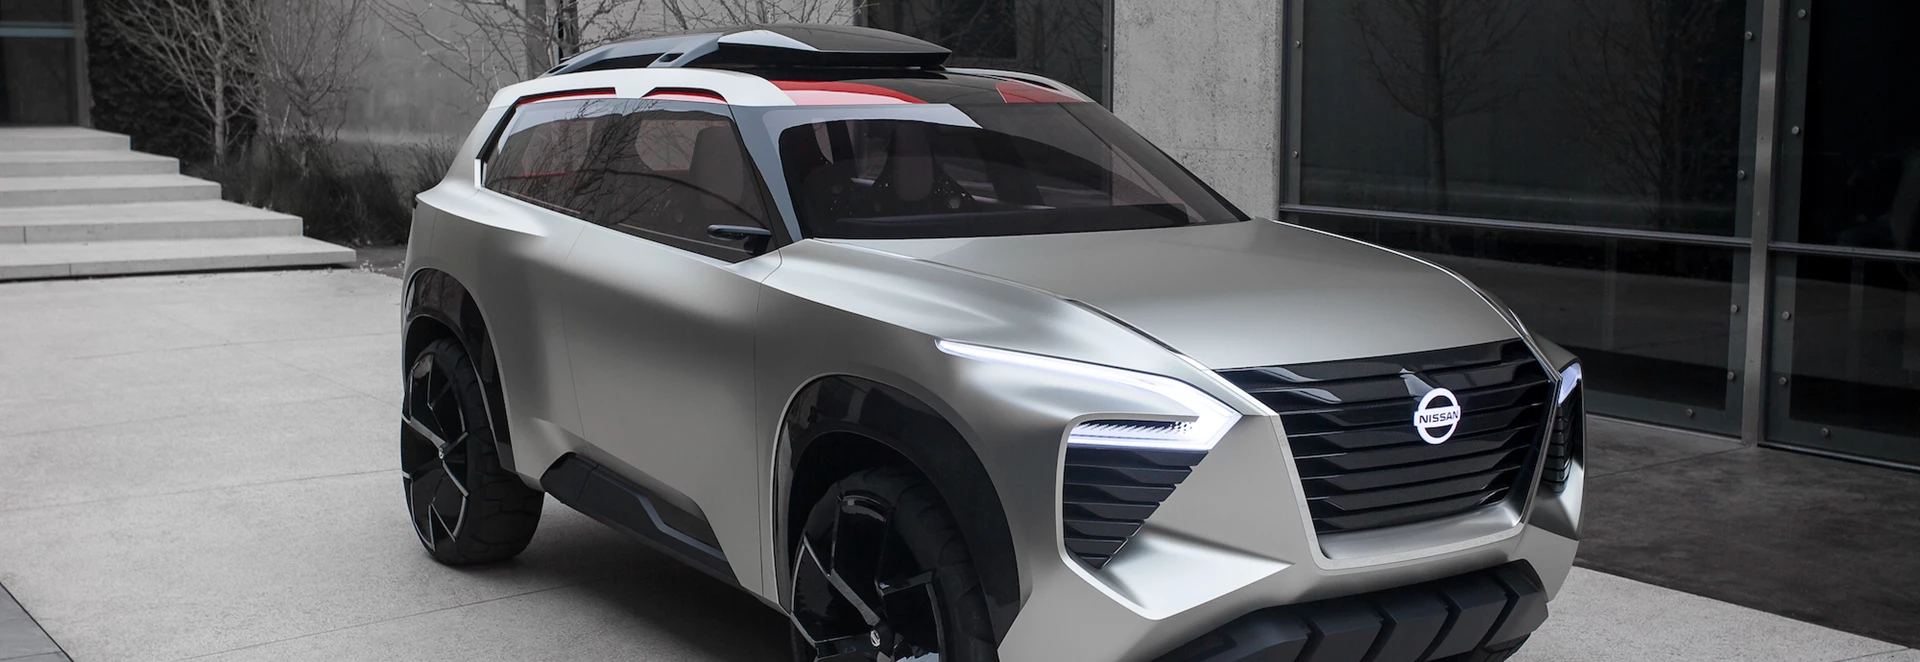 Nissan Xmotion SUV concept revealed at 2018 Detroit motor show 